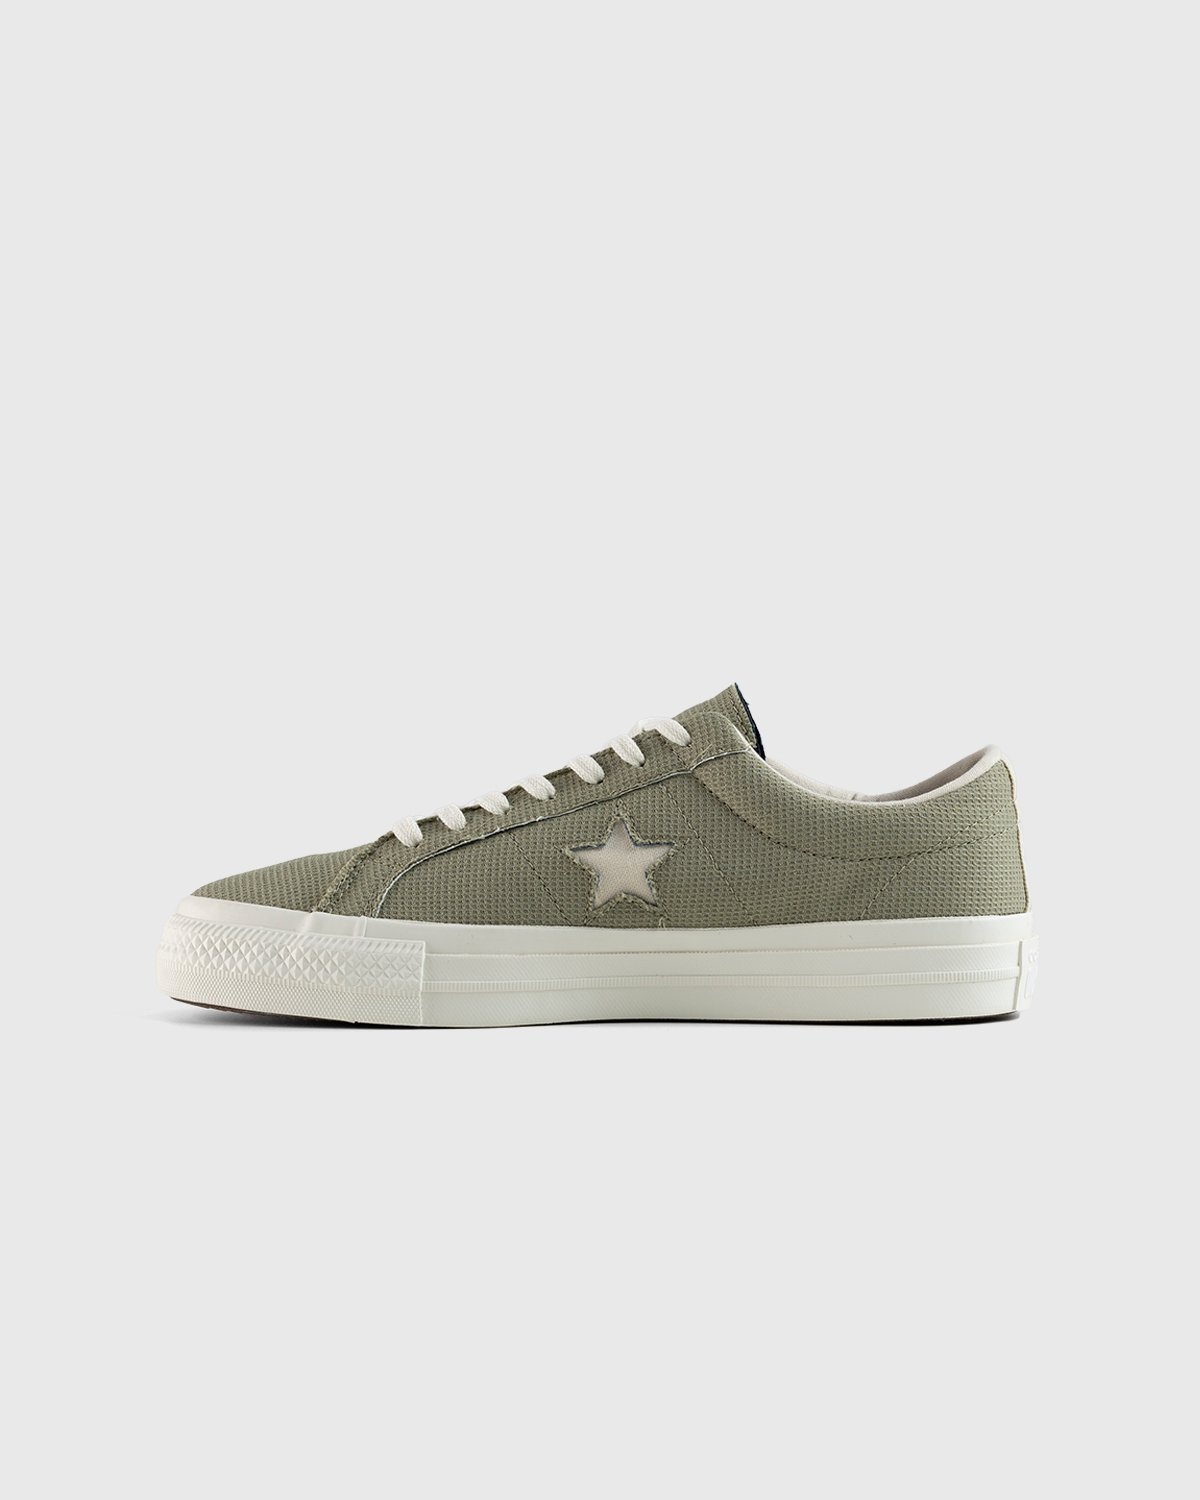 Converse – One Star Ox Indigo/Obsidian/Egret - Low Top Sneakers - Green - Image 2